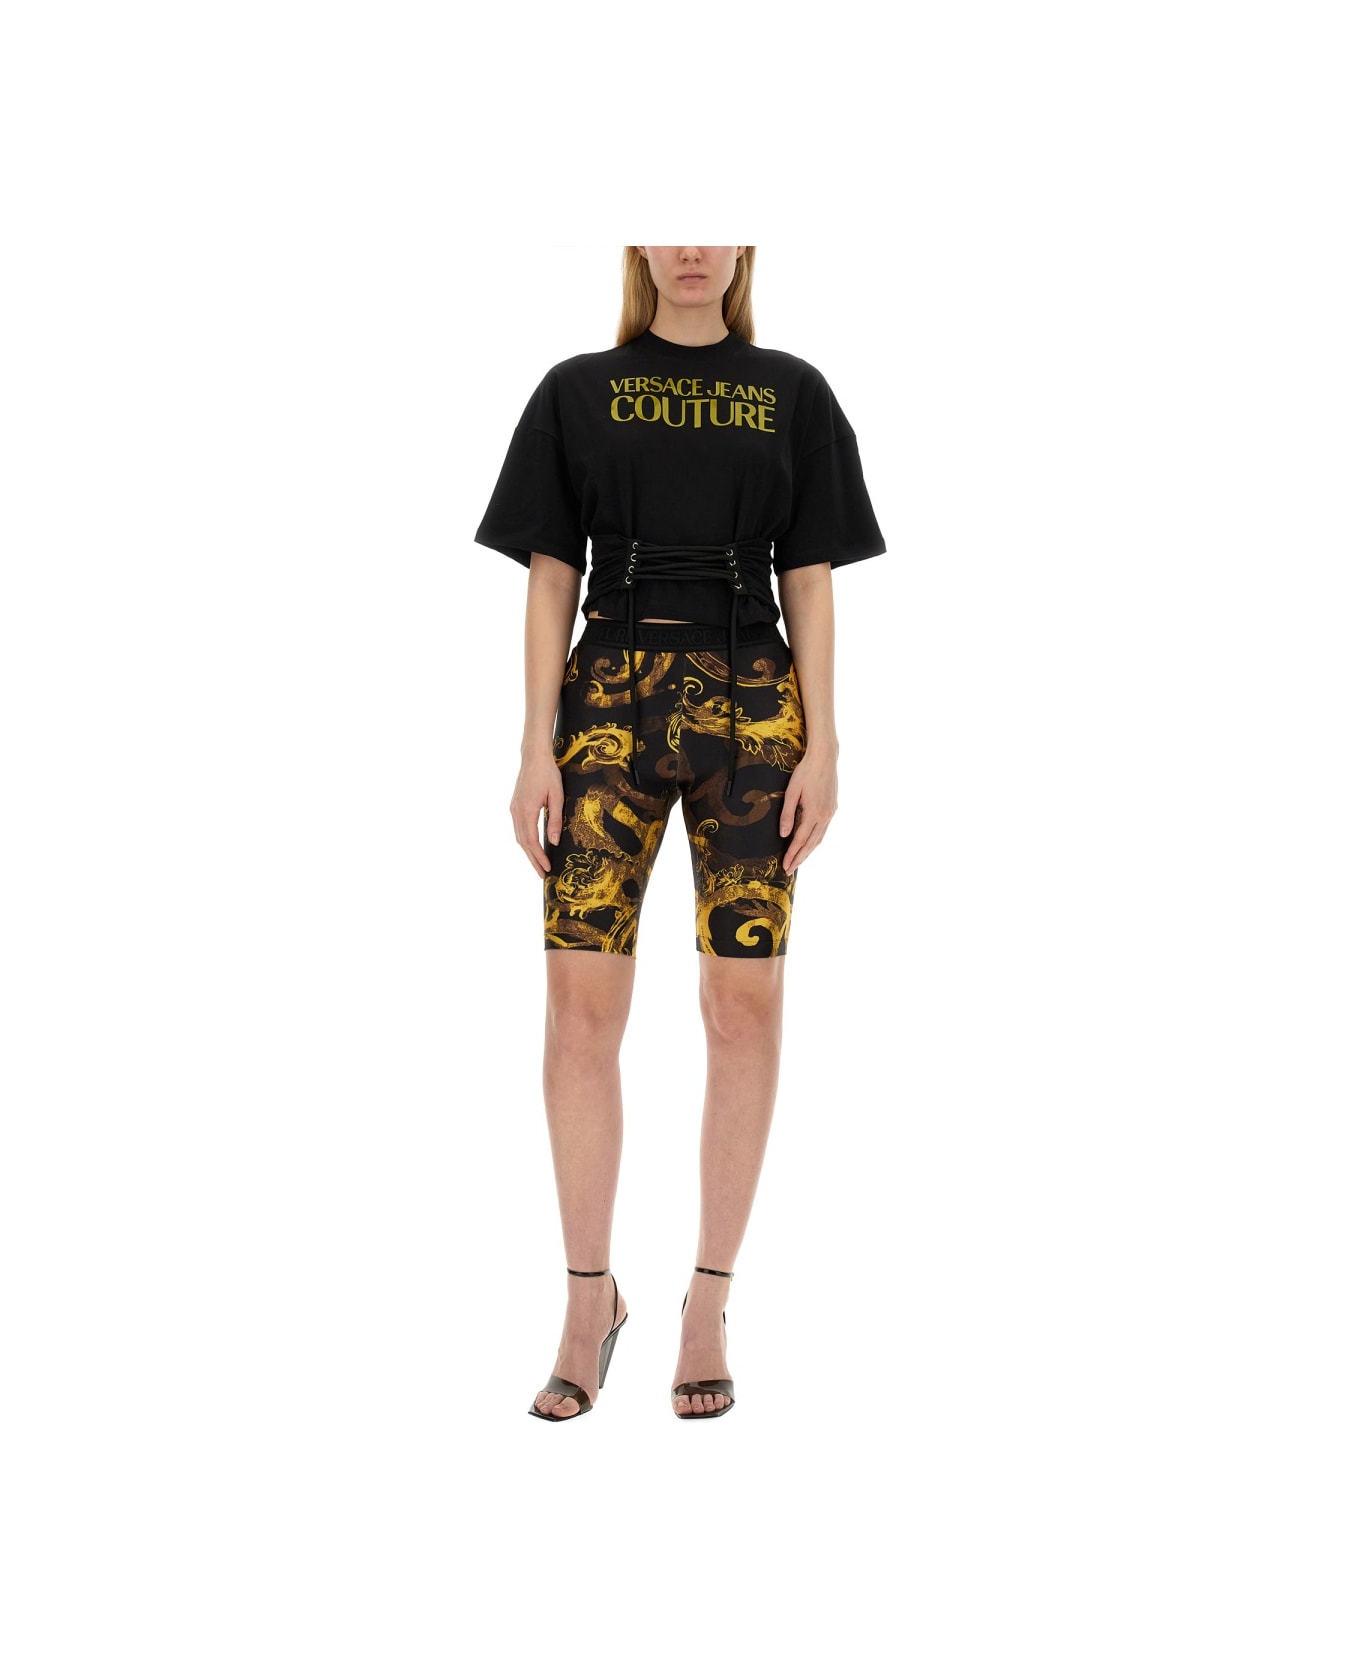 Versace Jeans Couture T-shirt With Logo - NERO